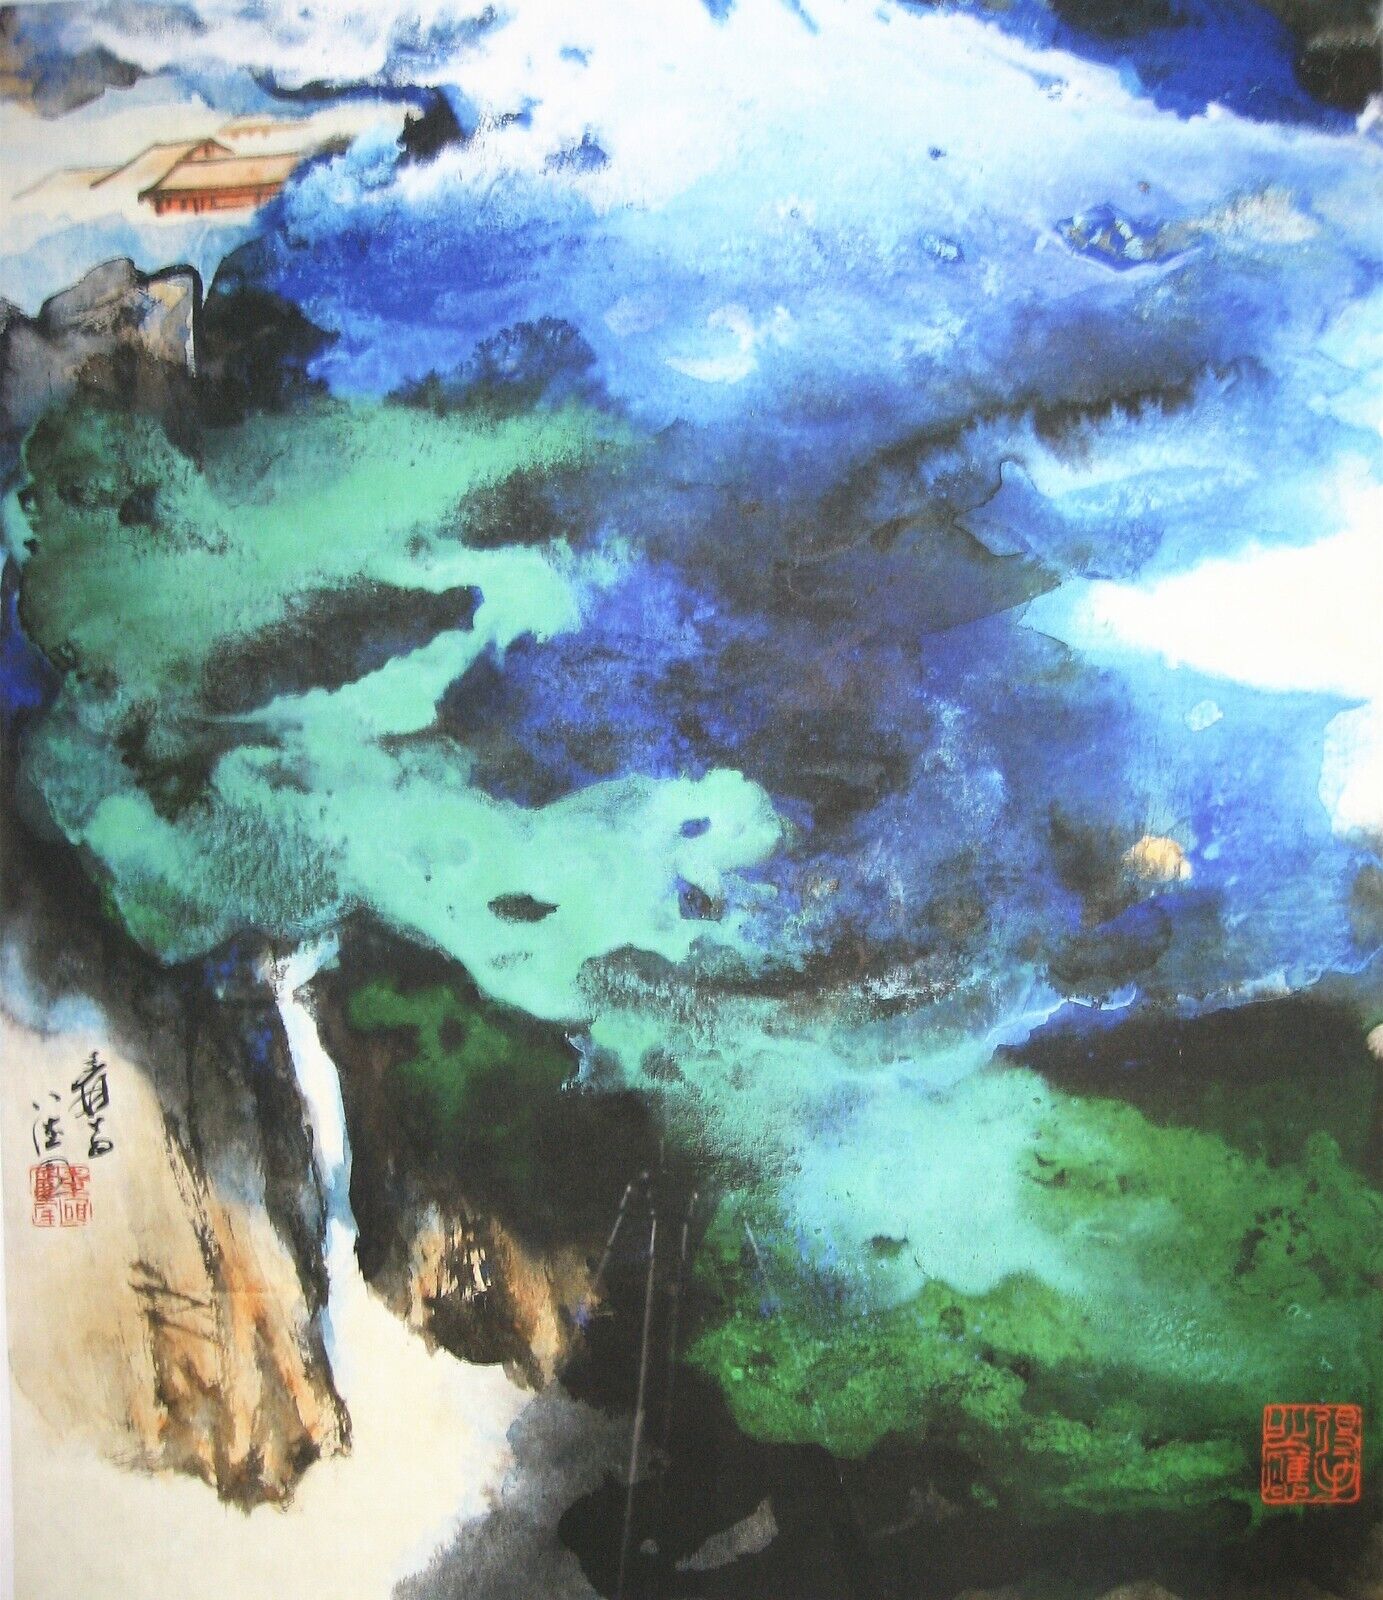 Chinese Painting Scroll Splash Color Landscape By Zhang Daqian 张大千 泼彩山水